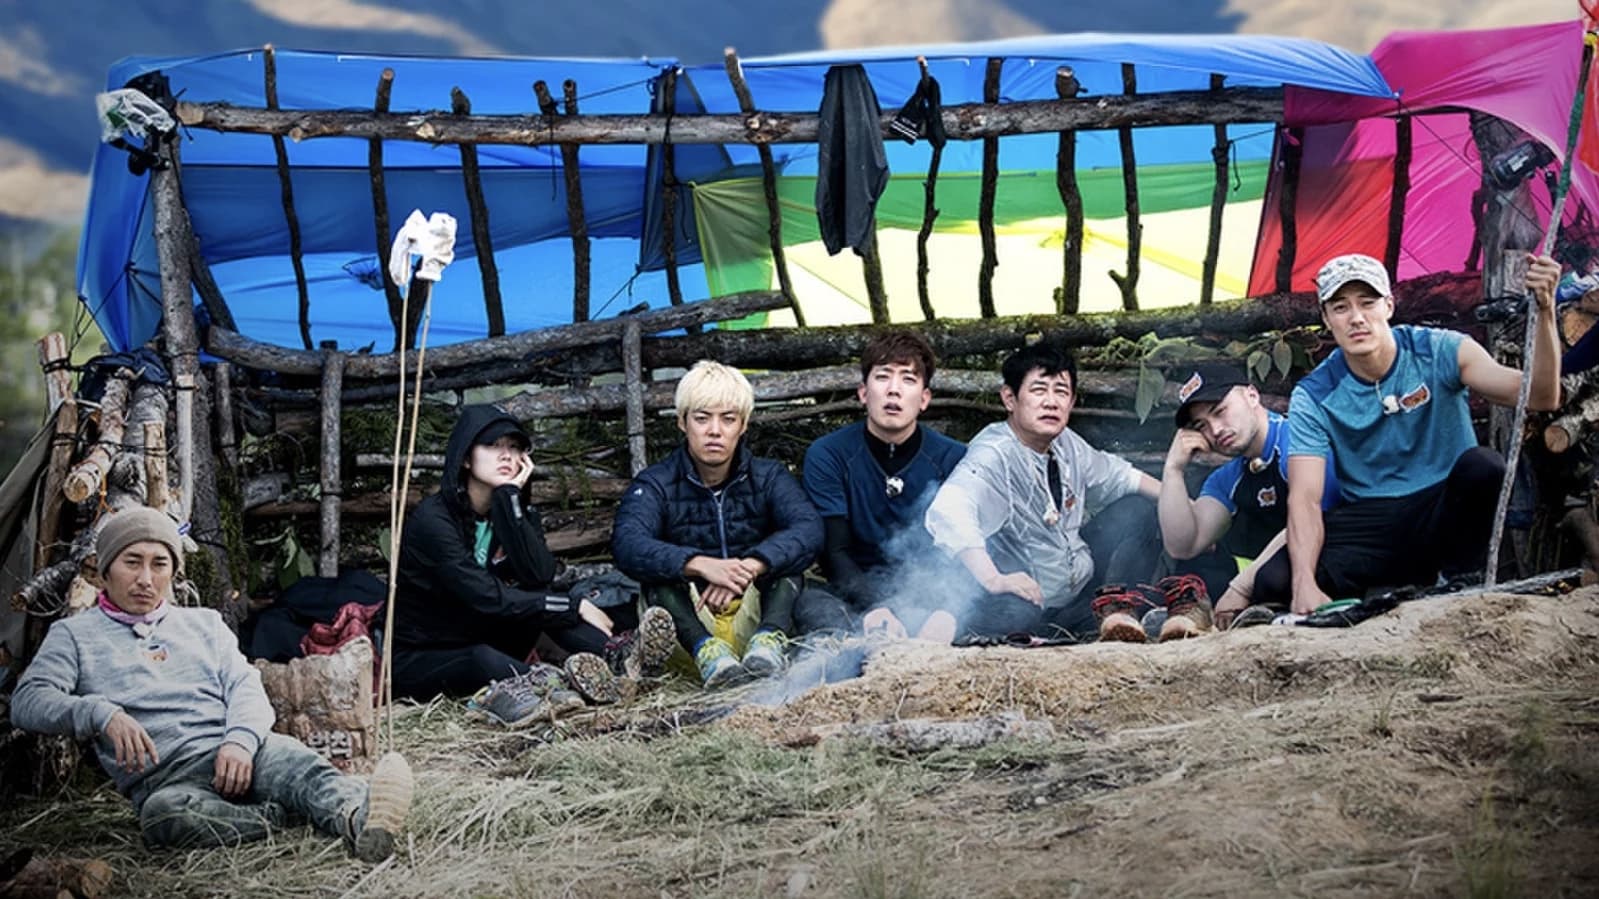 Law Of The Jungle in Mongolia - Nomad (1)